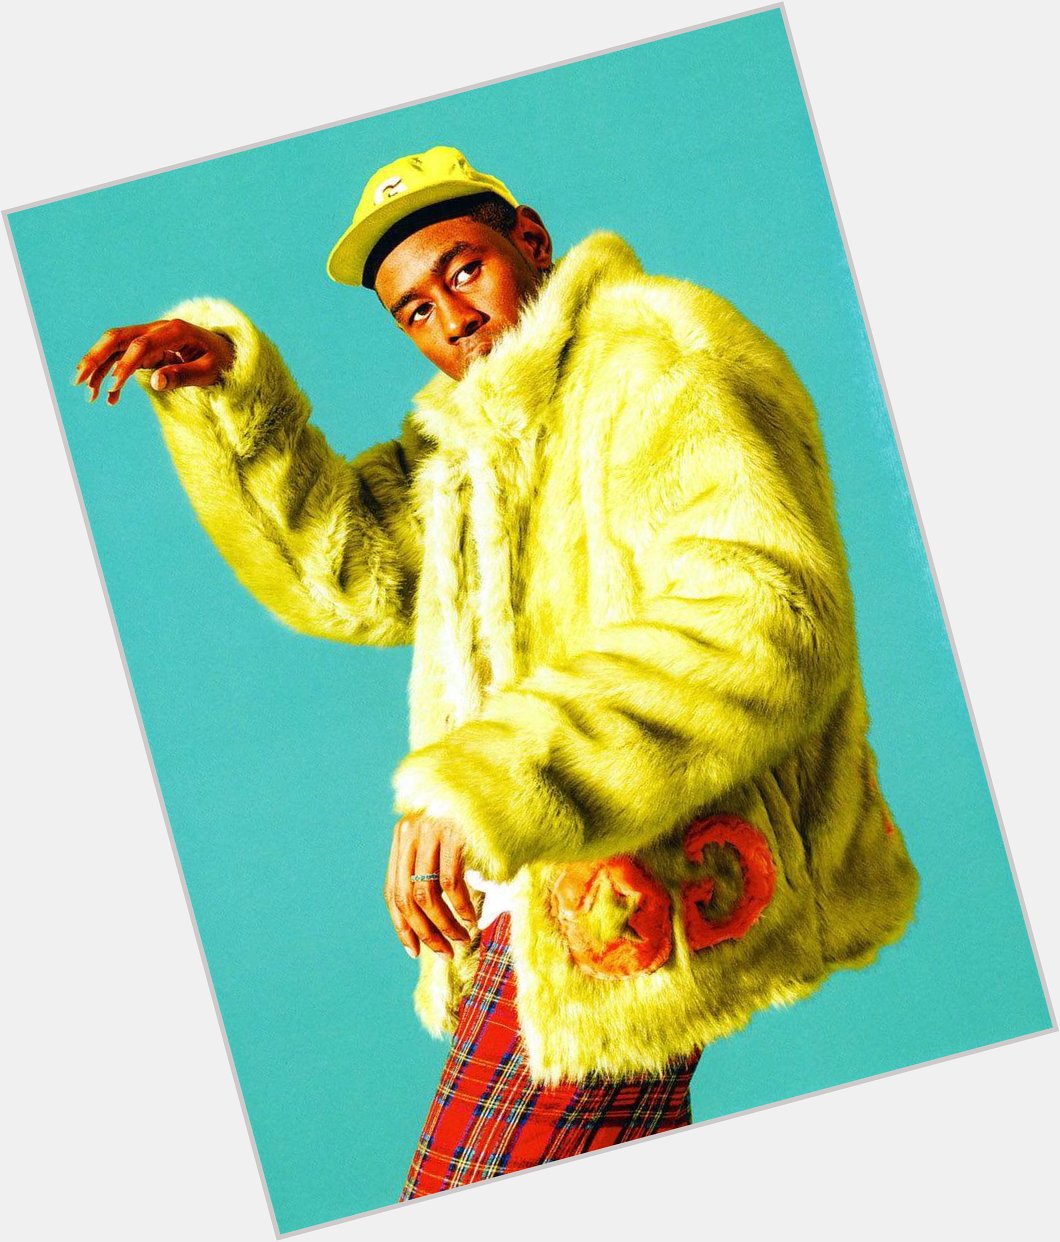 Happy 26th birthday to a carefree icon, Tyler the Creator. 